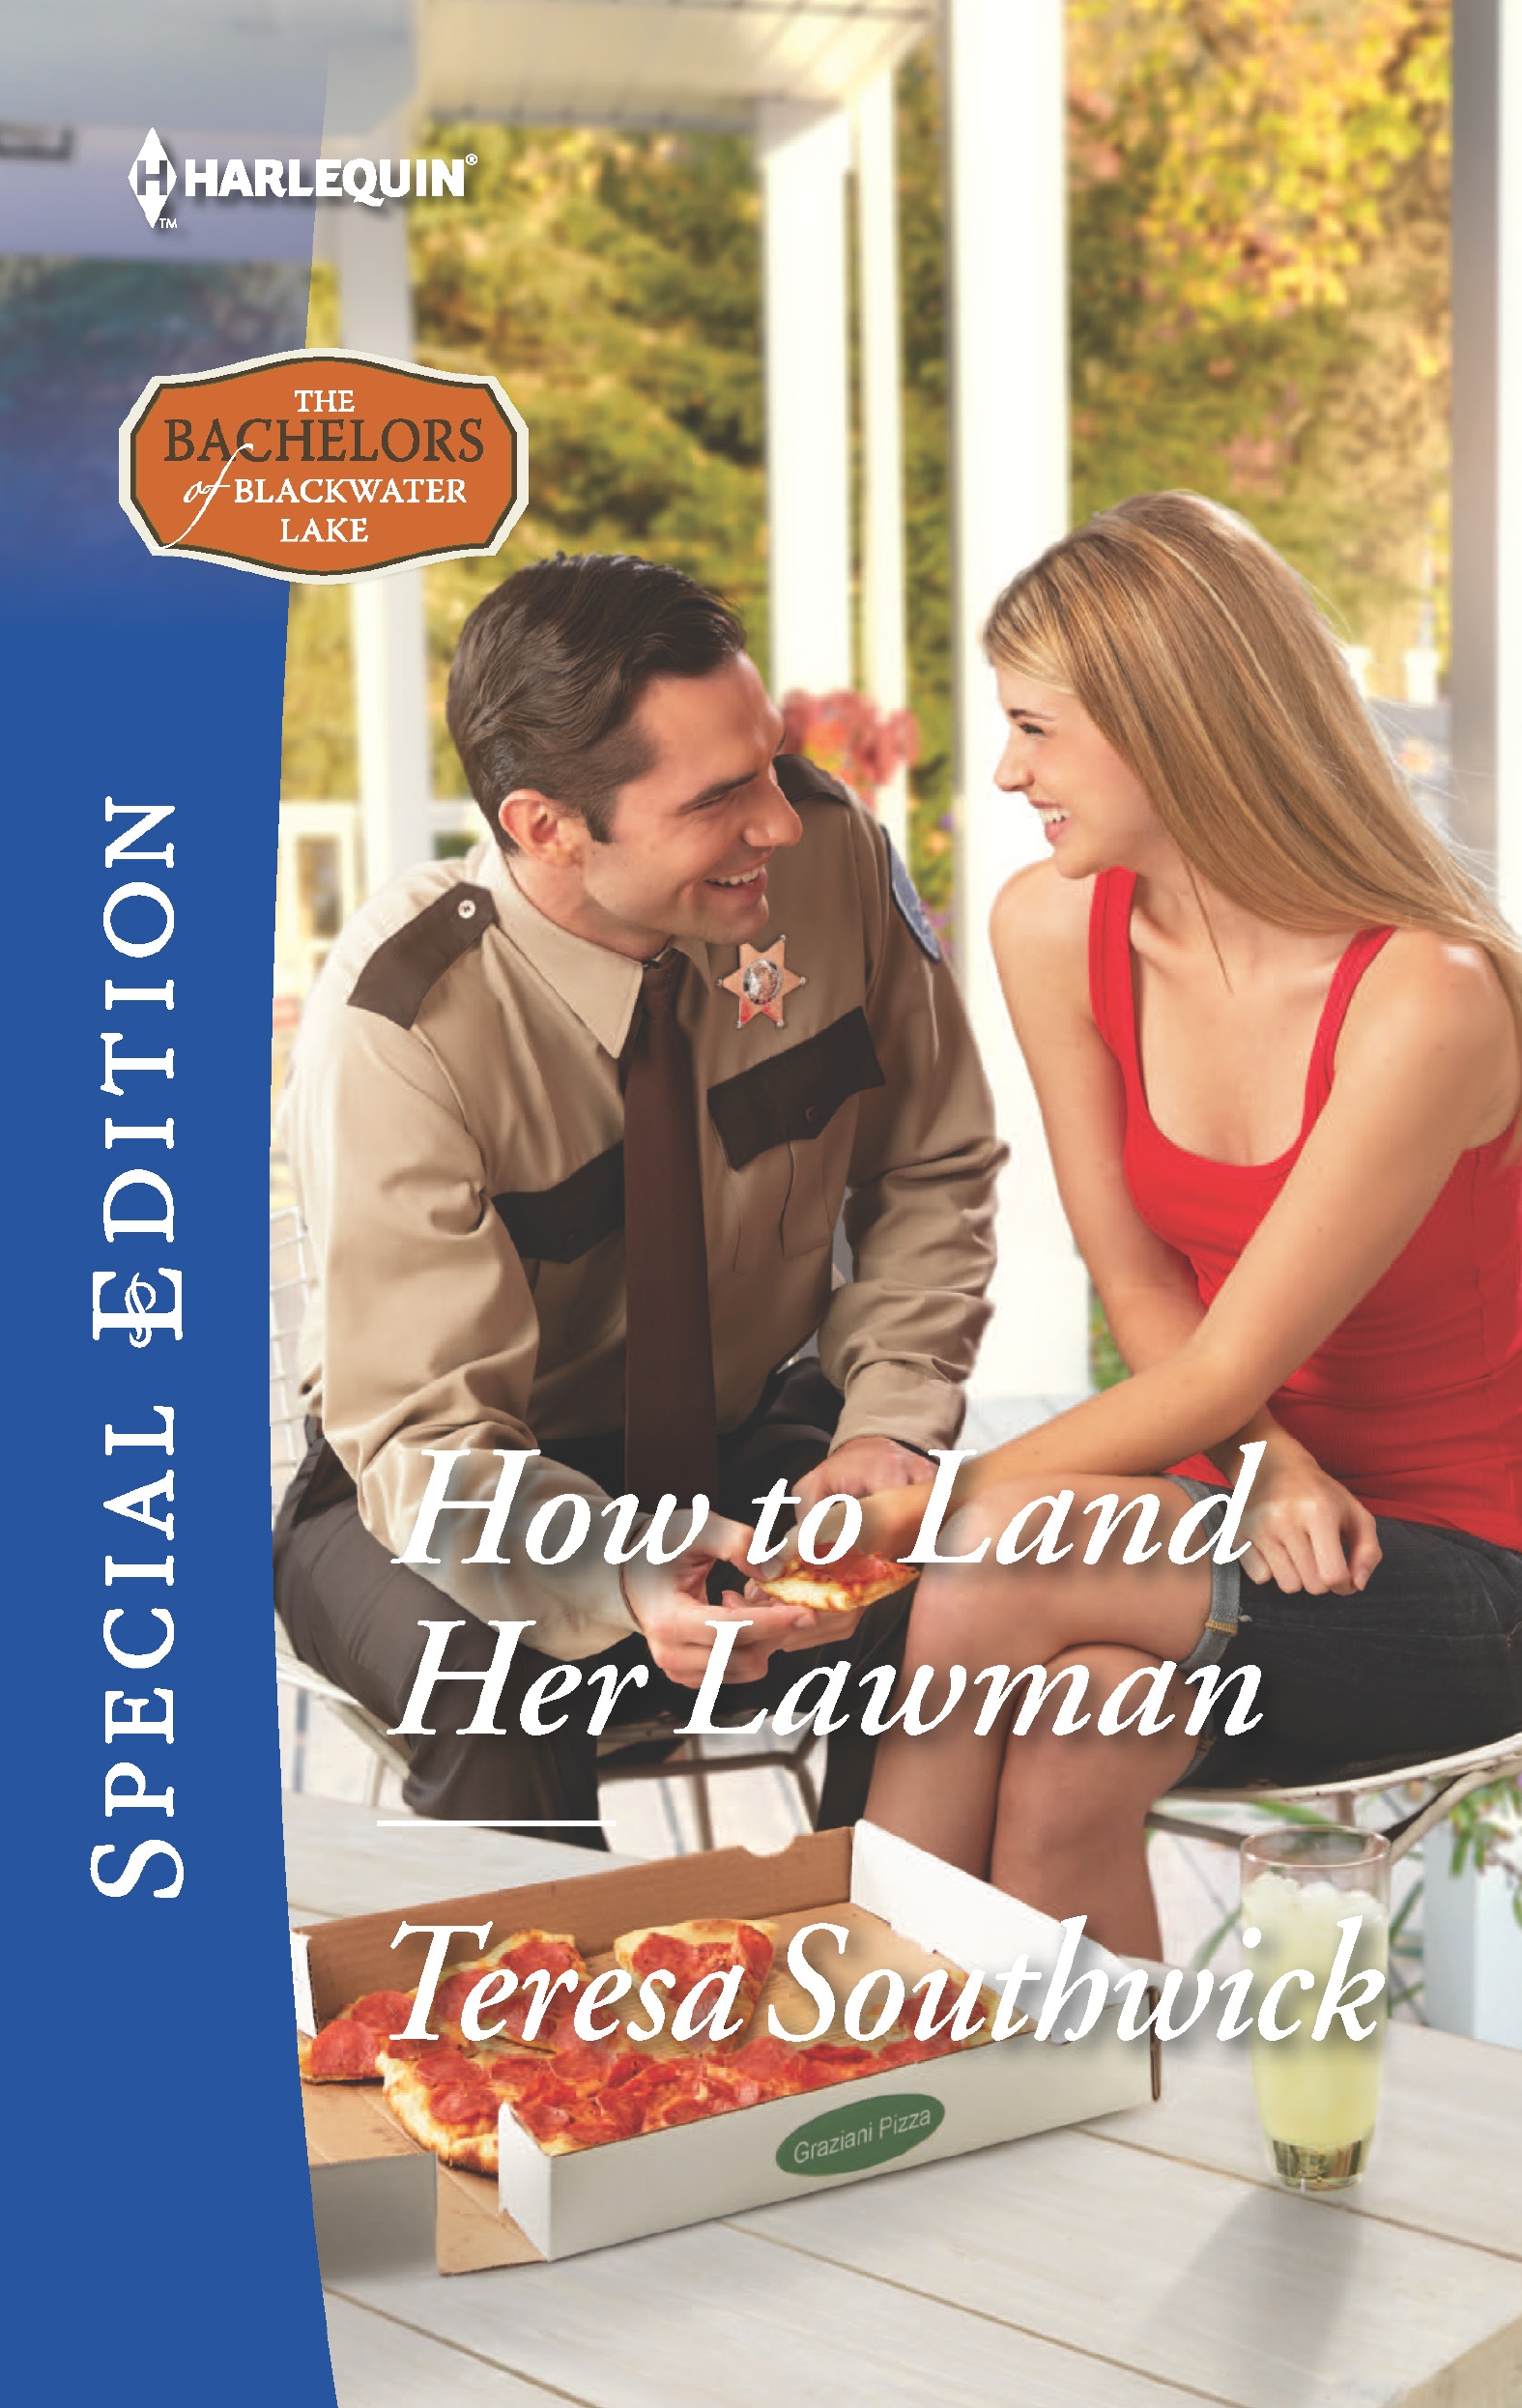 How to Land Her Lawman (2016)